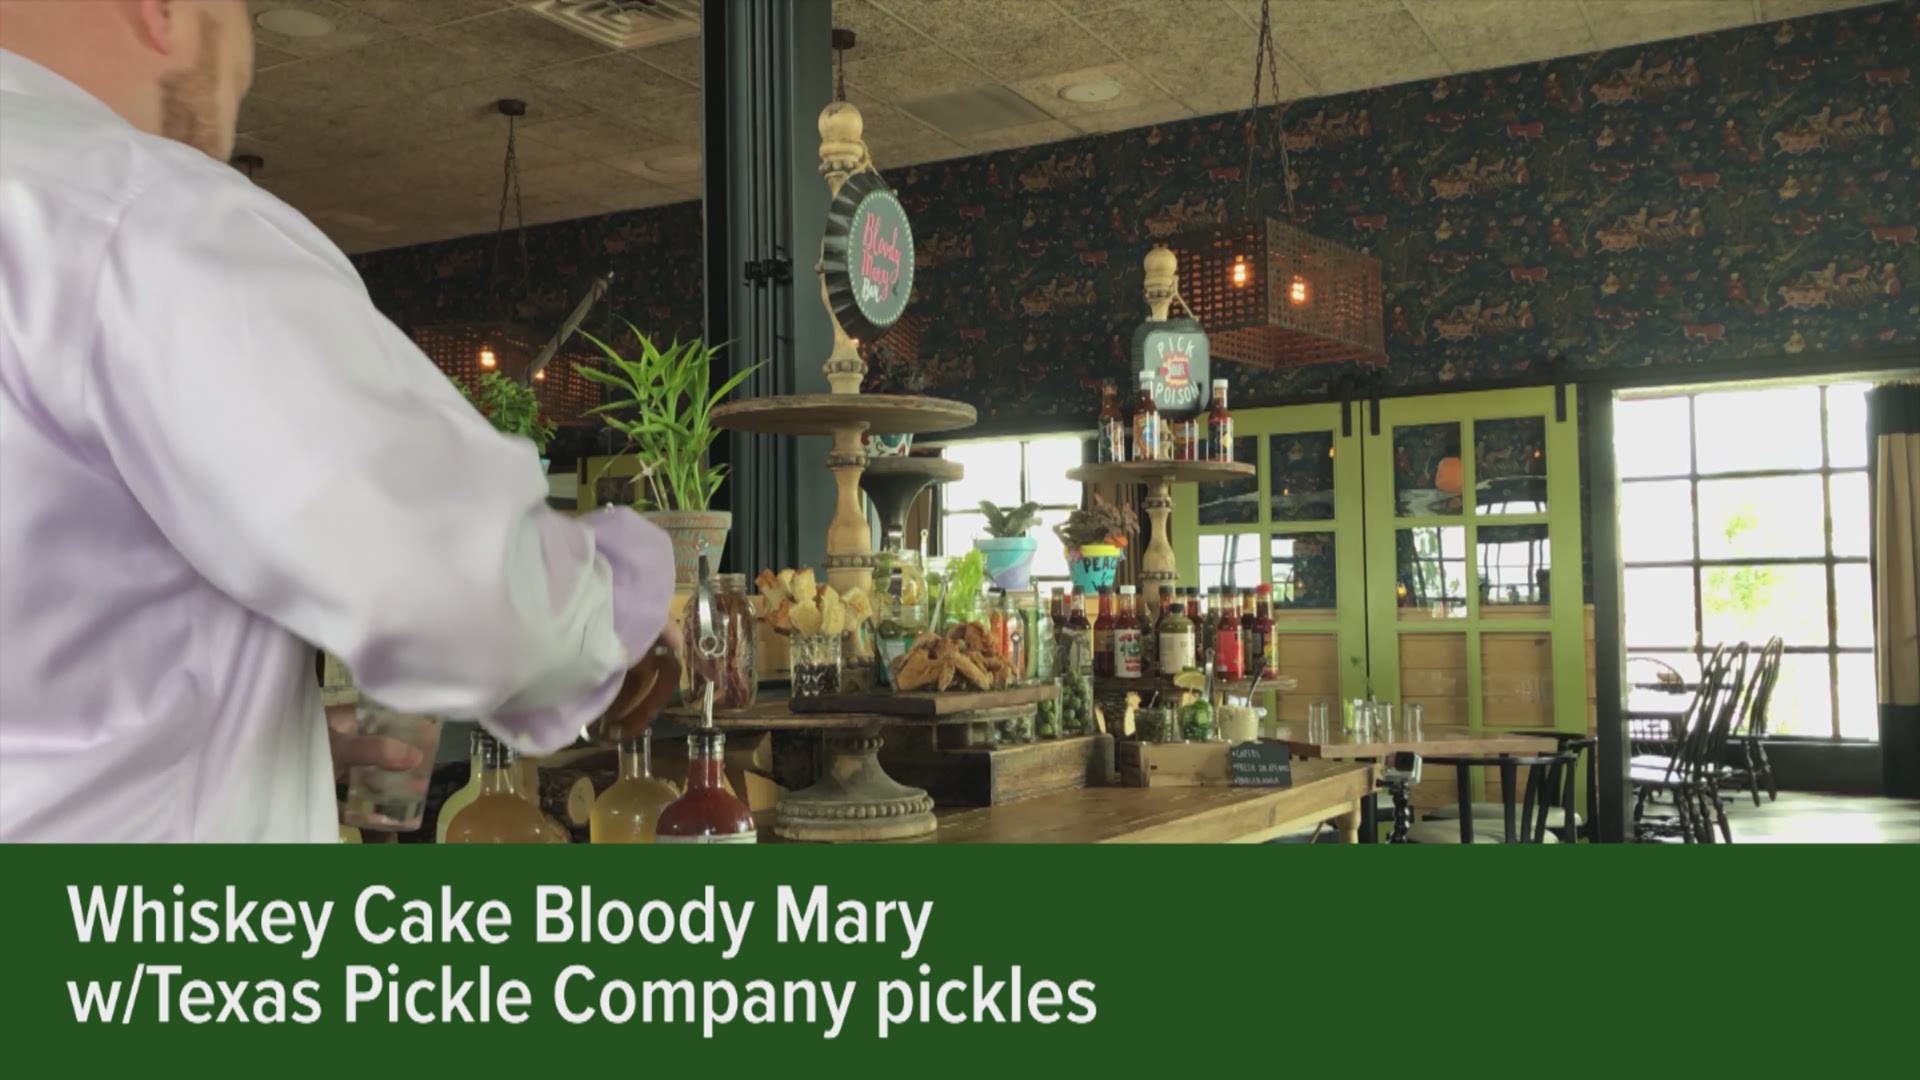 Watch to find out how pickles and pickle juice can perk up a Bloody Mary.